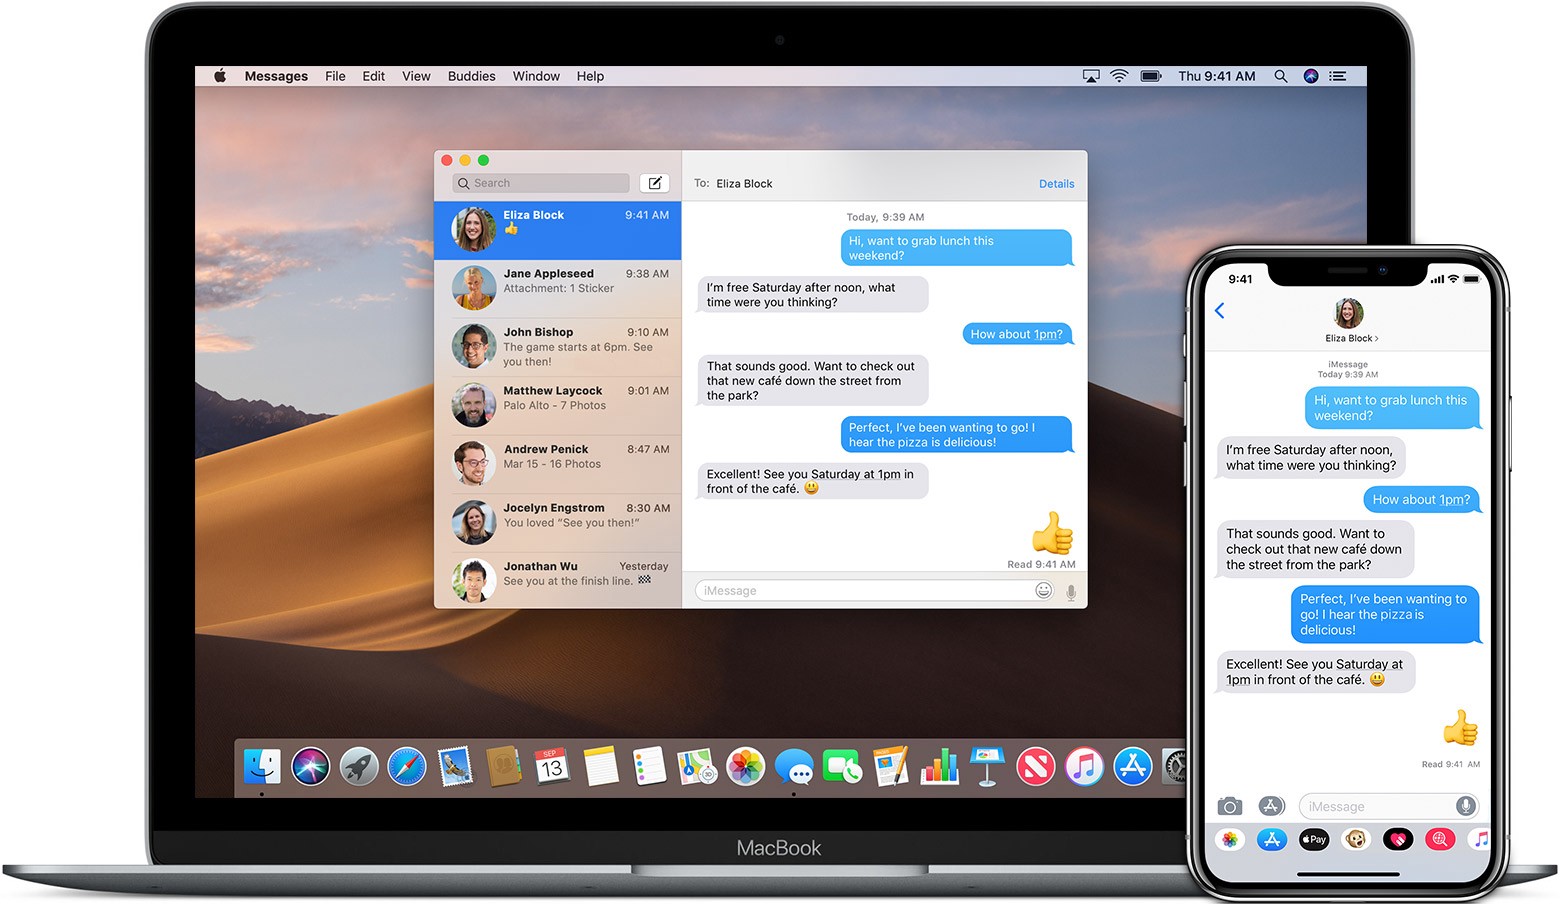 how to link ipad and iphone imessage